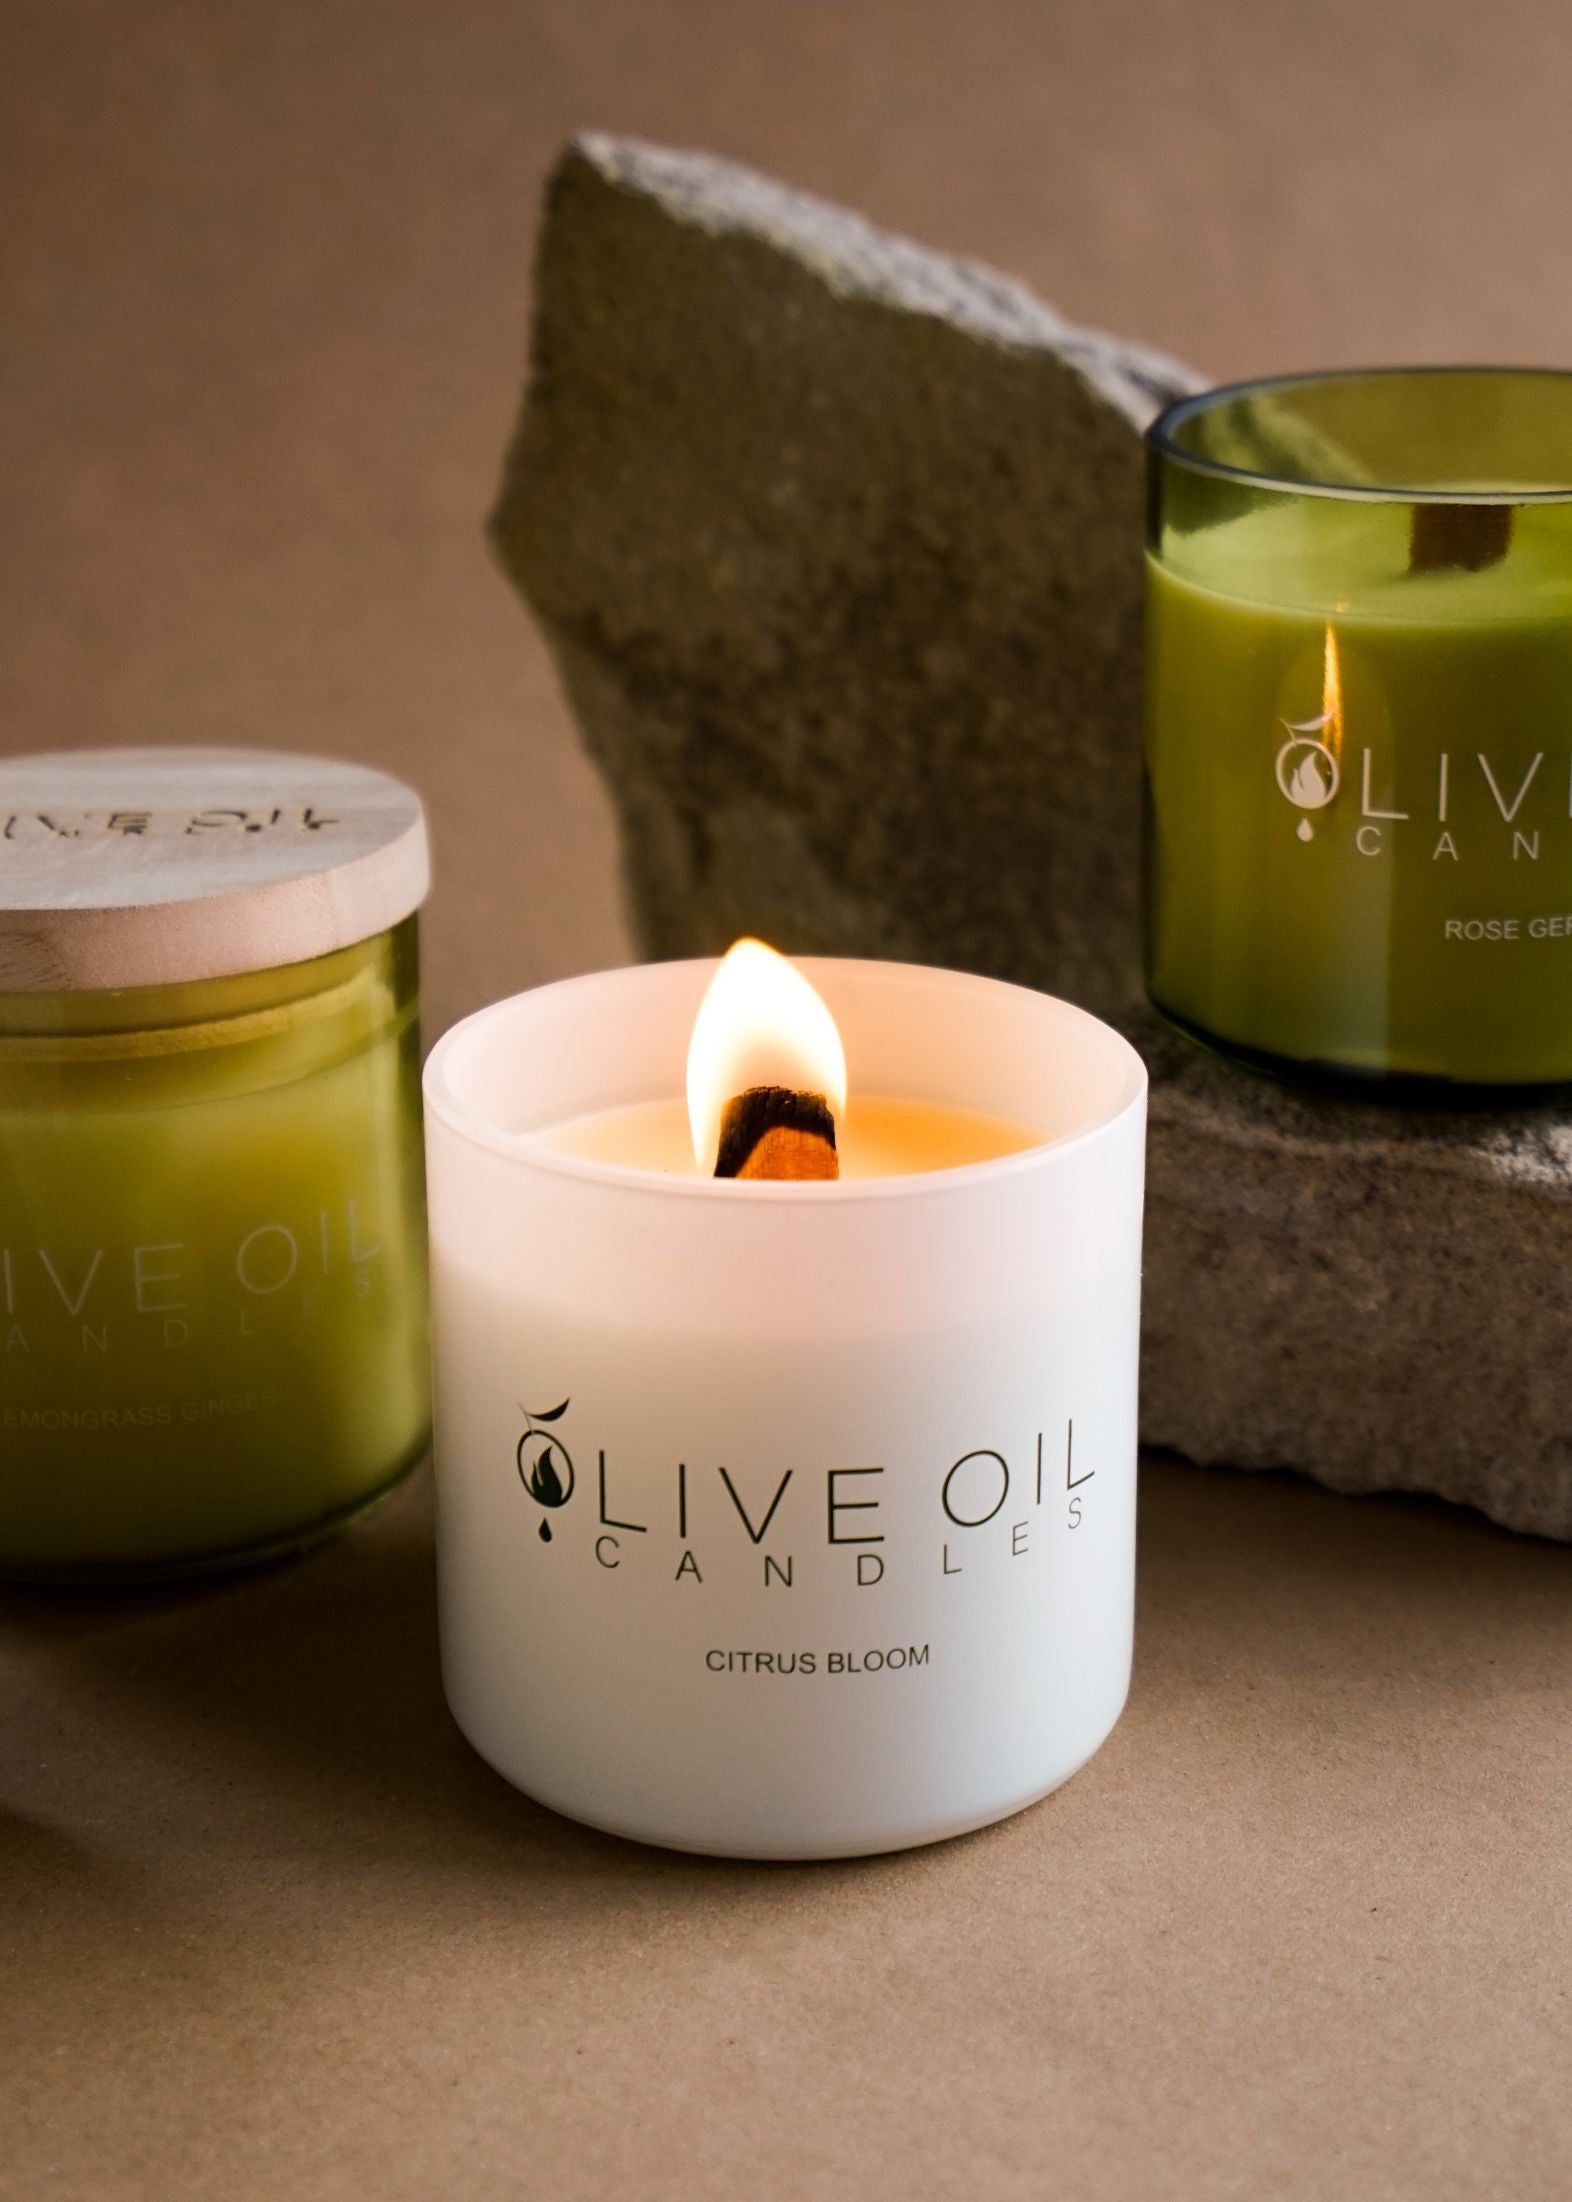 Oliveoil Candle , Citrus Bloom, 200g